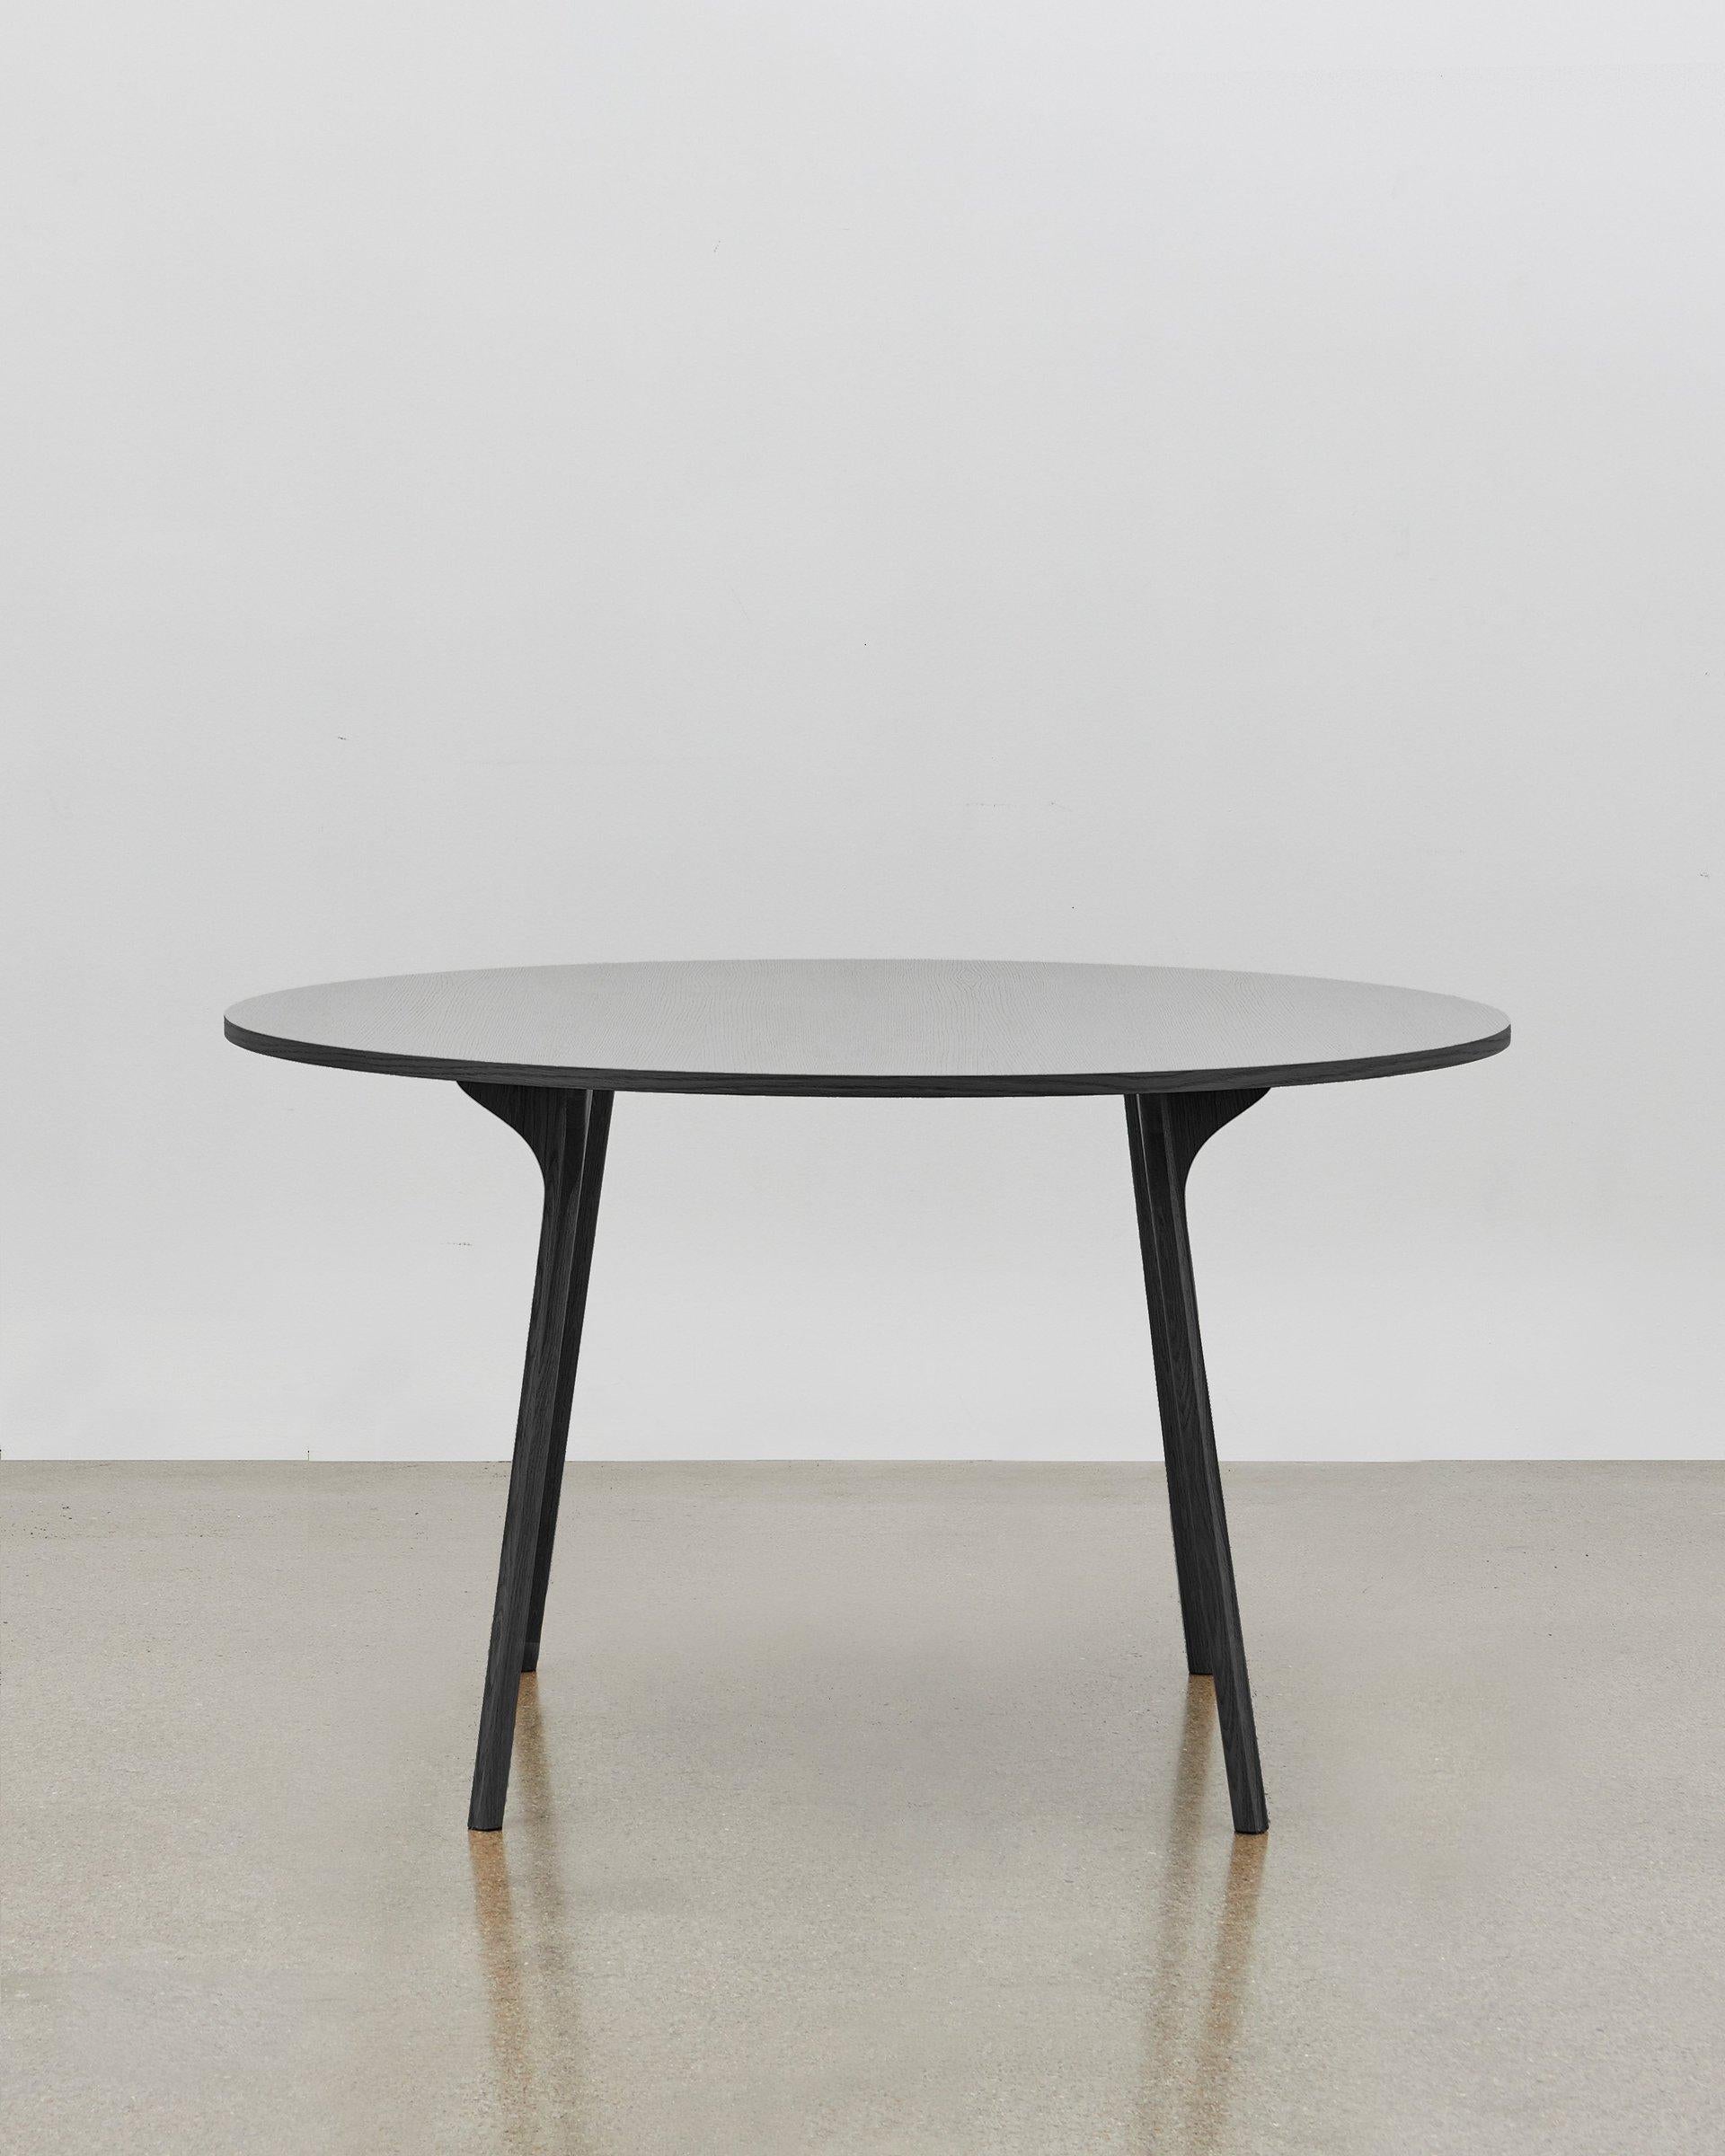 The intricately shaped legs of the PH circle table, inspired by the agile movement of the scarab beetle, together with the benefit of precision design and engineering, enable Poul Henningsen to design a table with the most unobtrusive of legs.